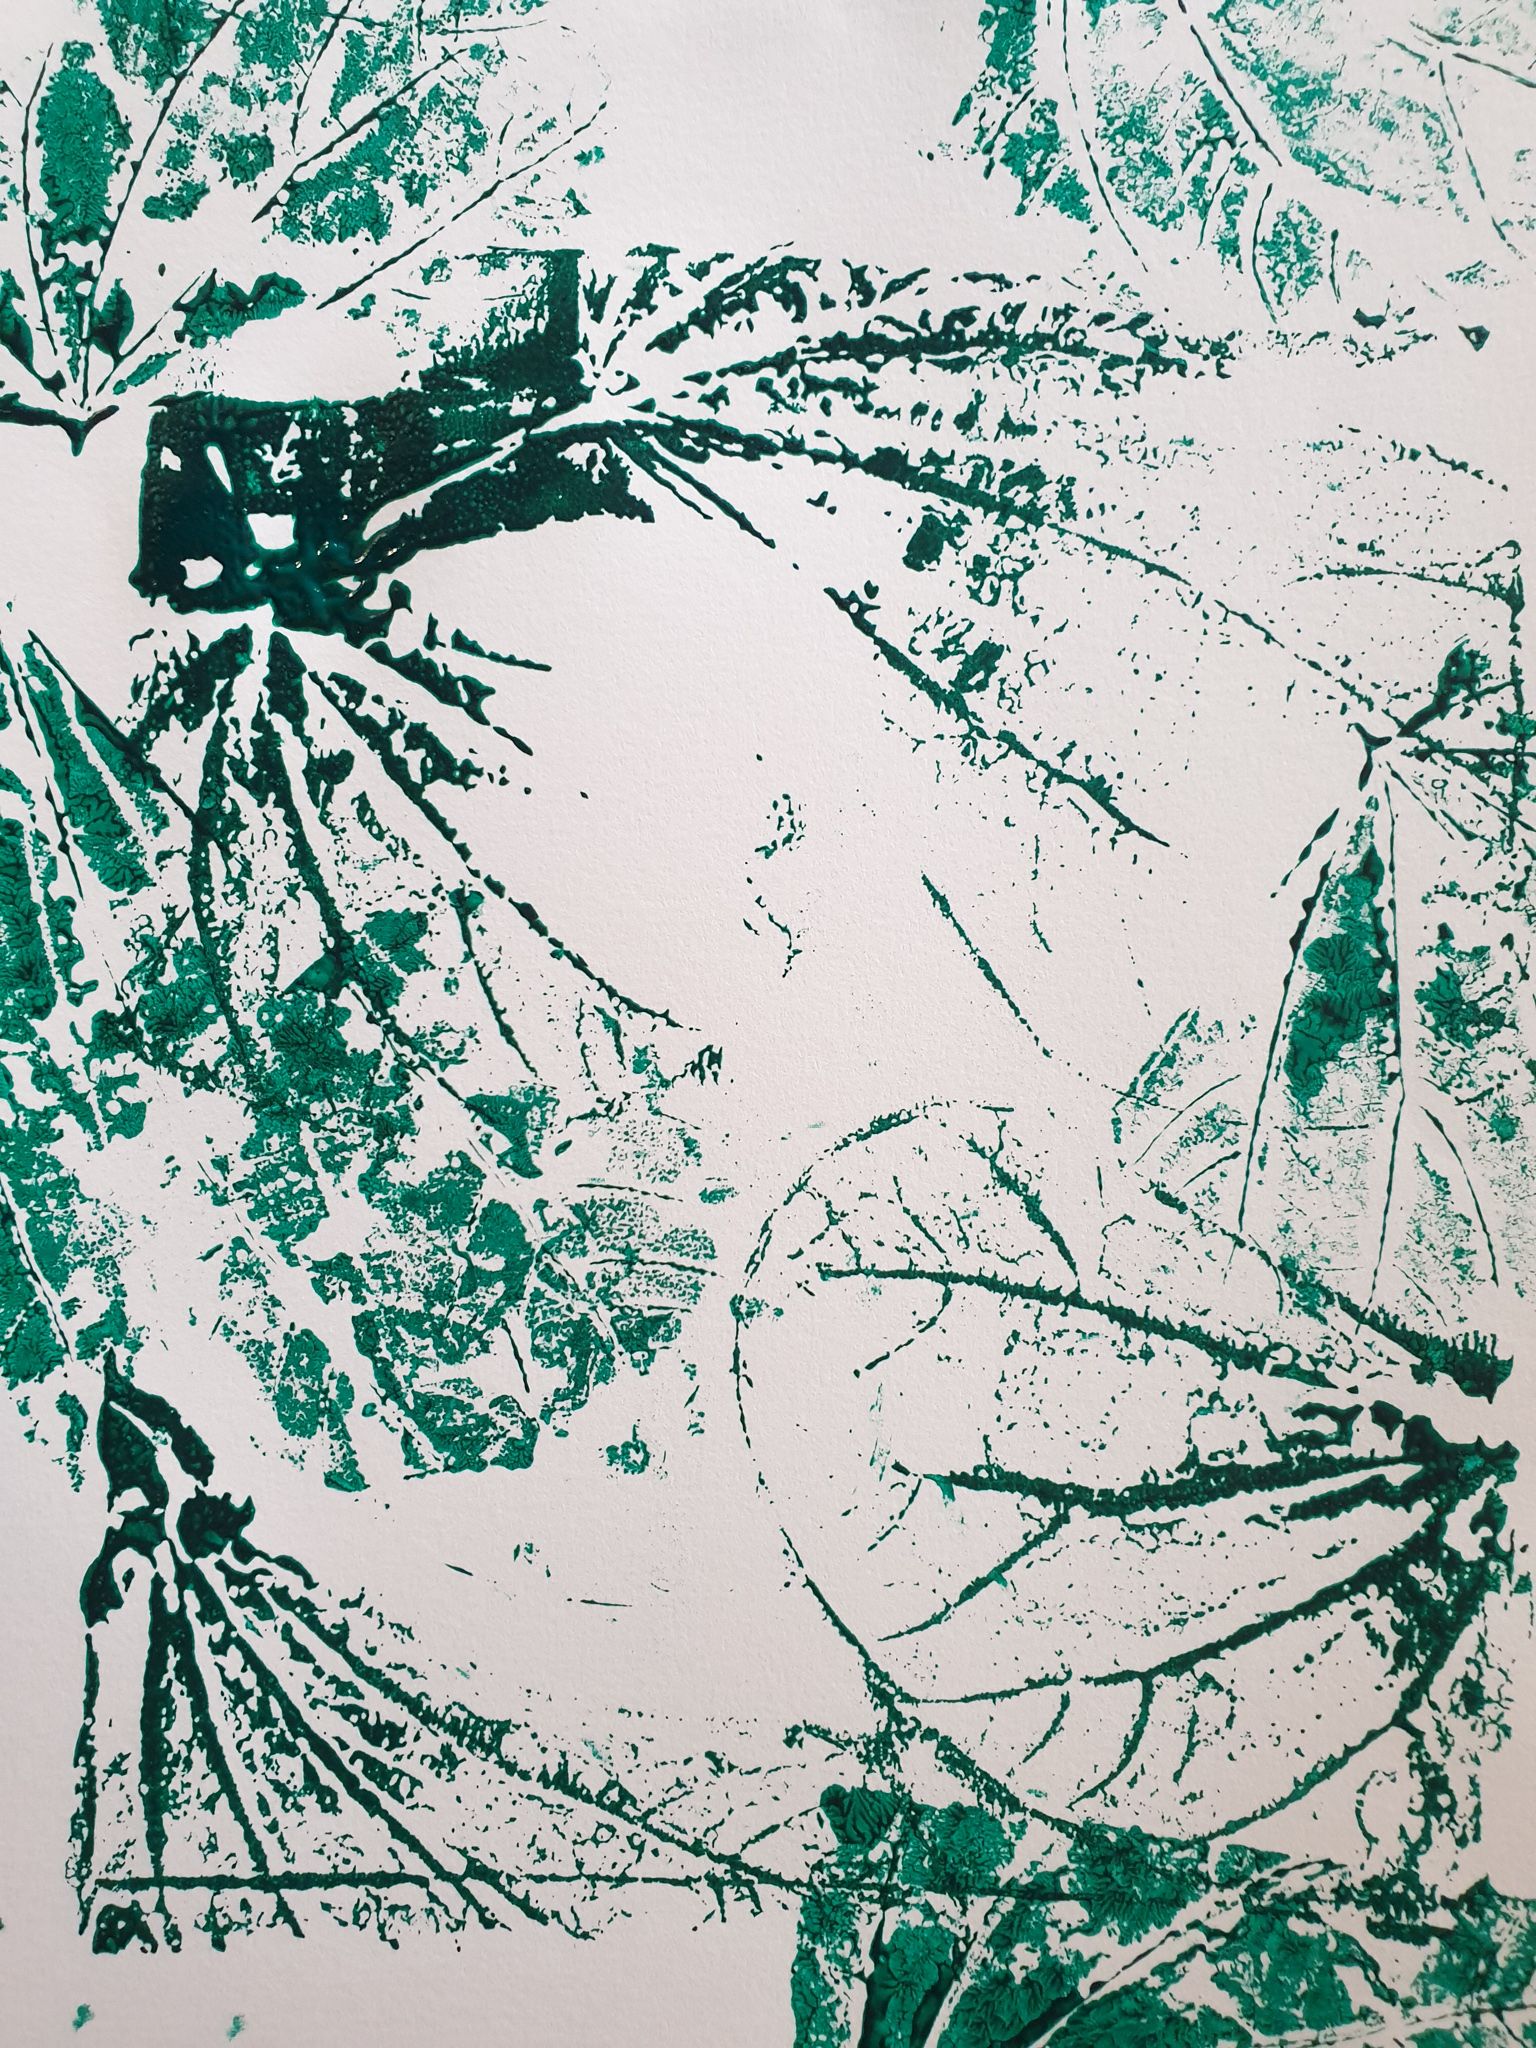 Used leaves with remaining paint to print on paper